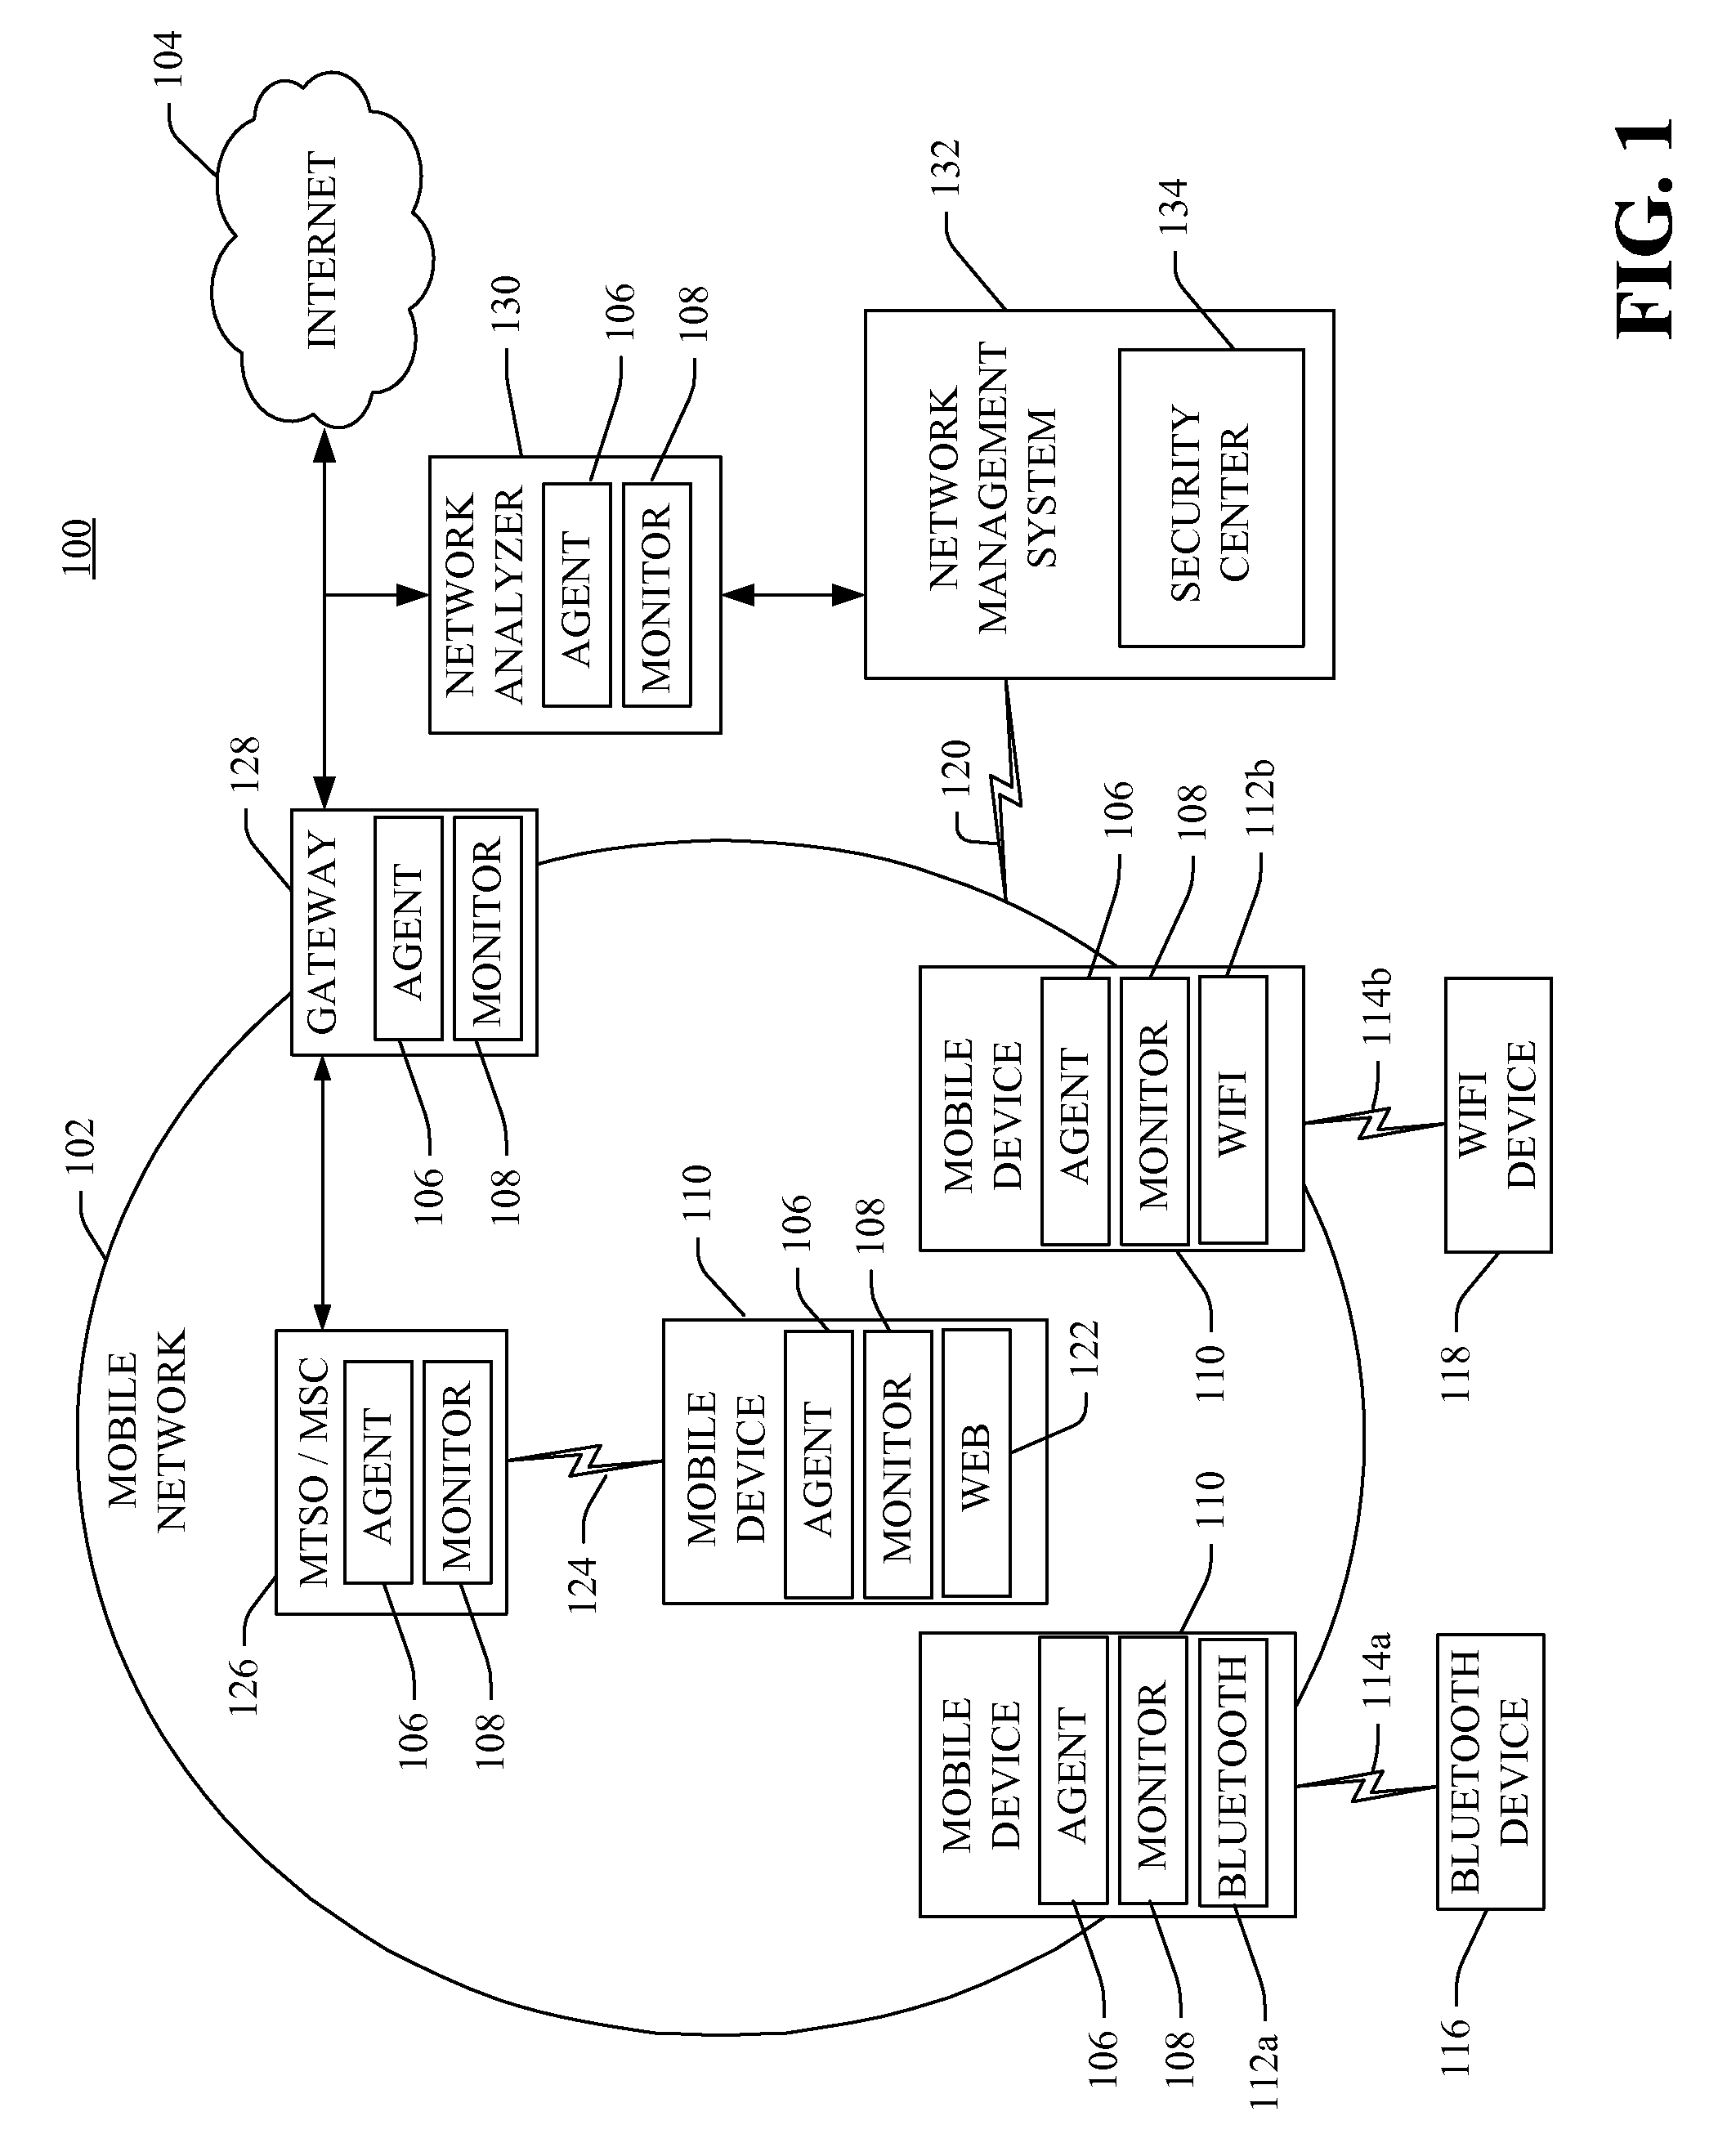 Wireless intrusion prevention system and method